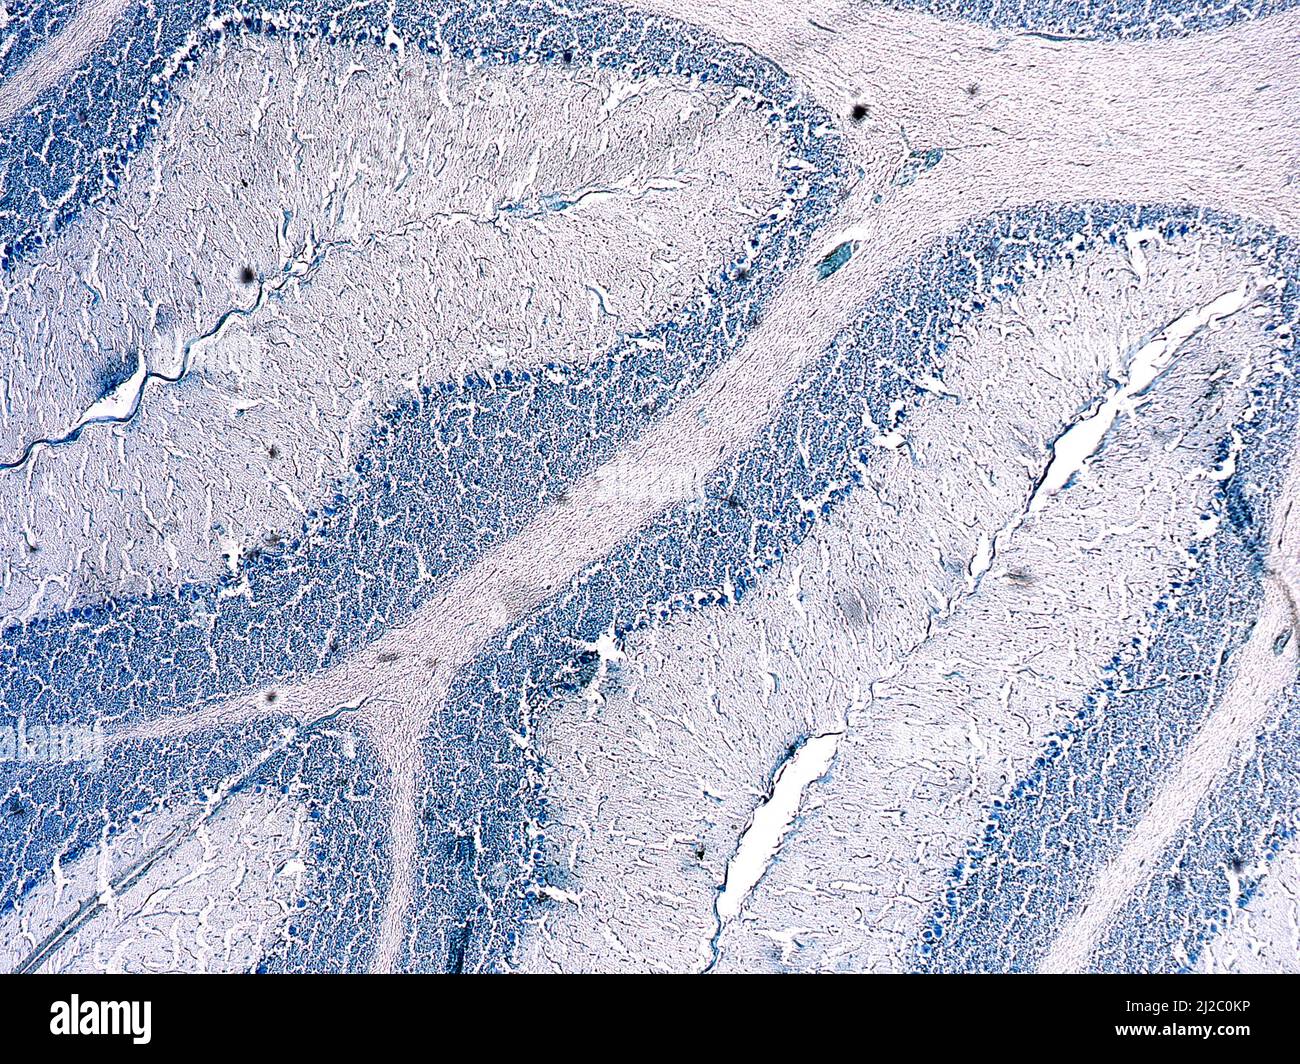 Cross section of a cerebellum. Purkinje cells. Light micrograph. Cresyl Violet Staining (Nissl Staining). Stock Photo